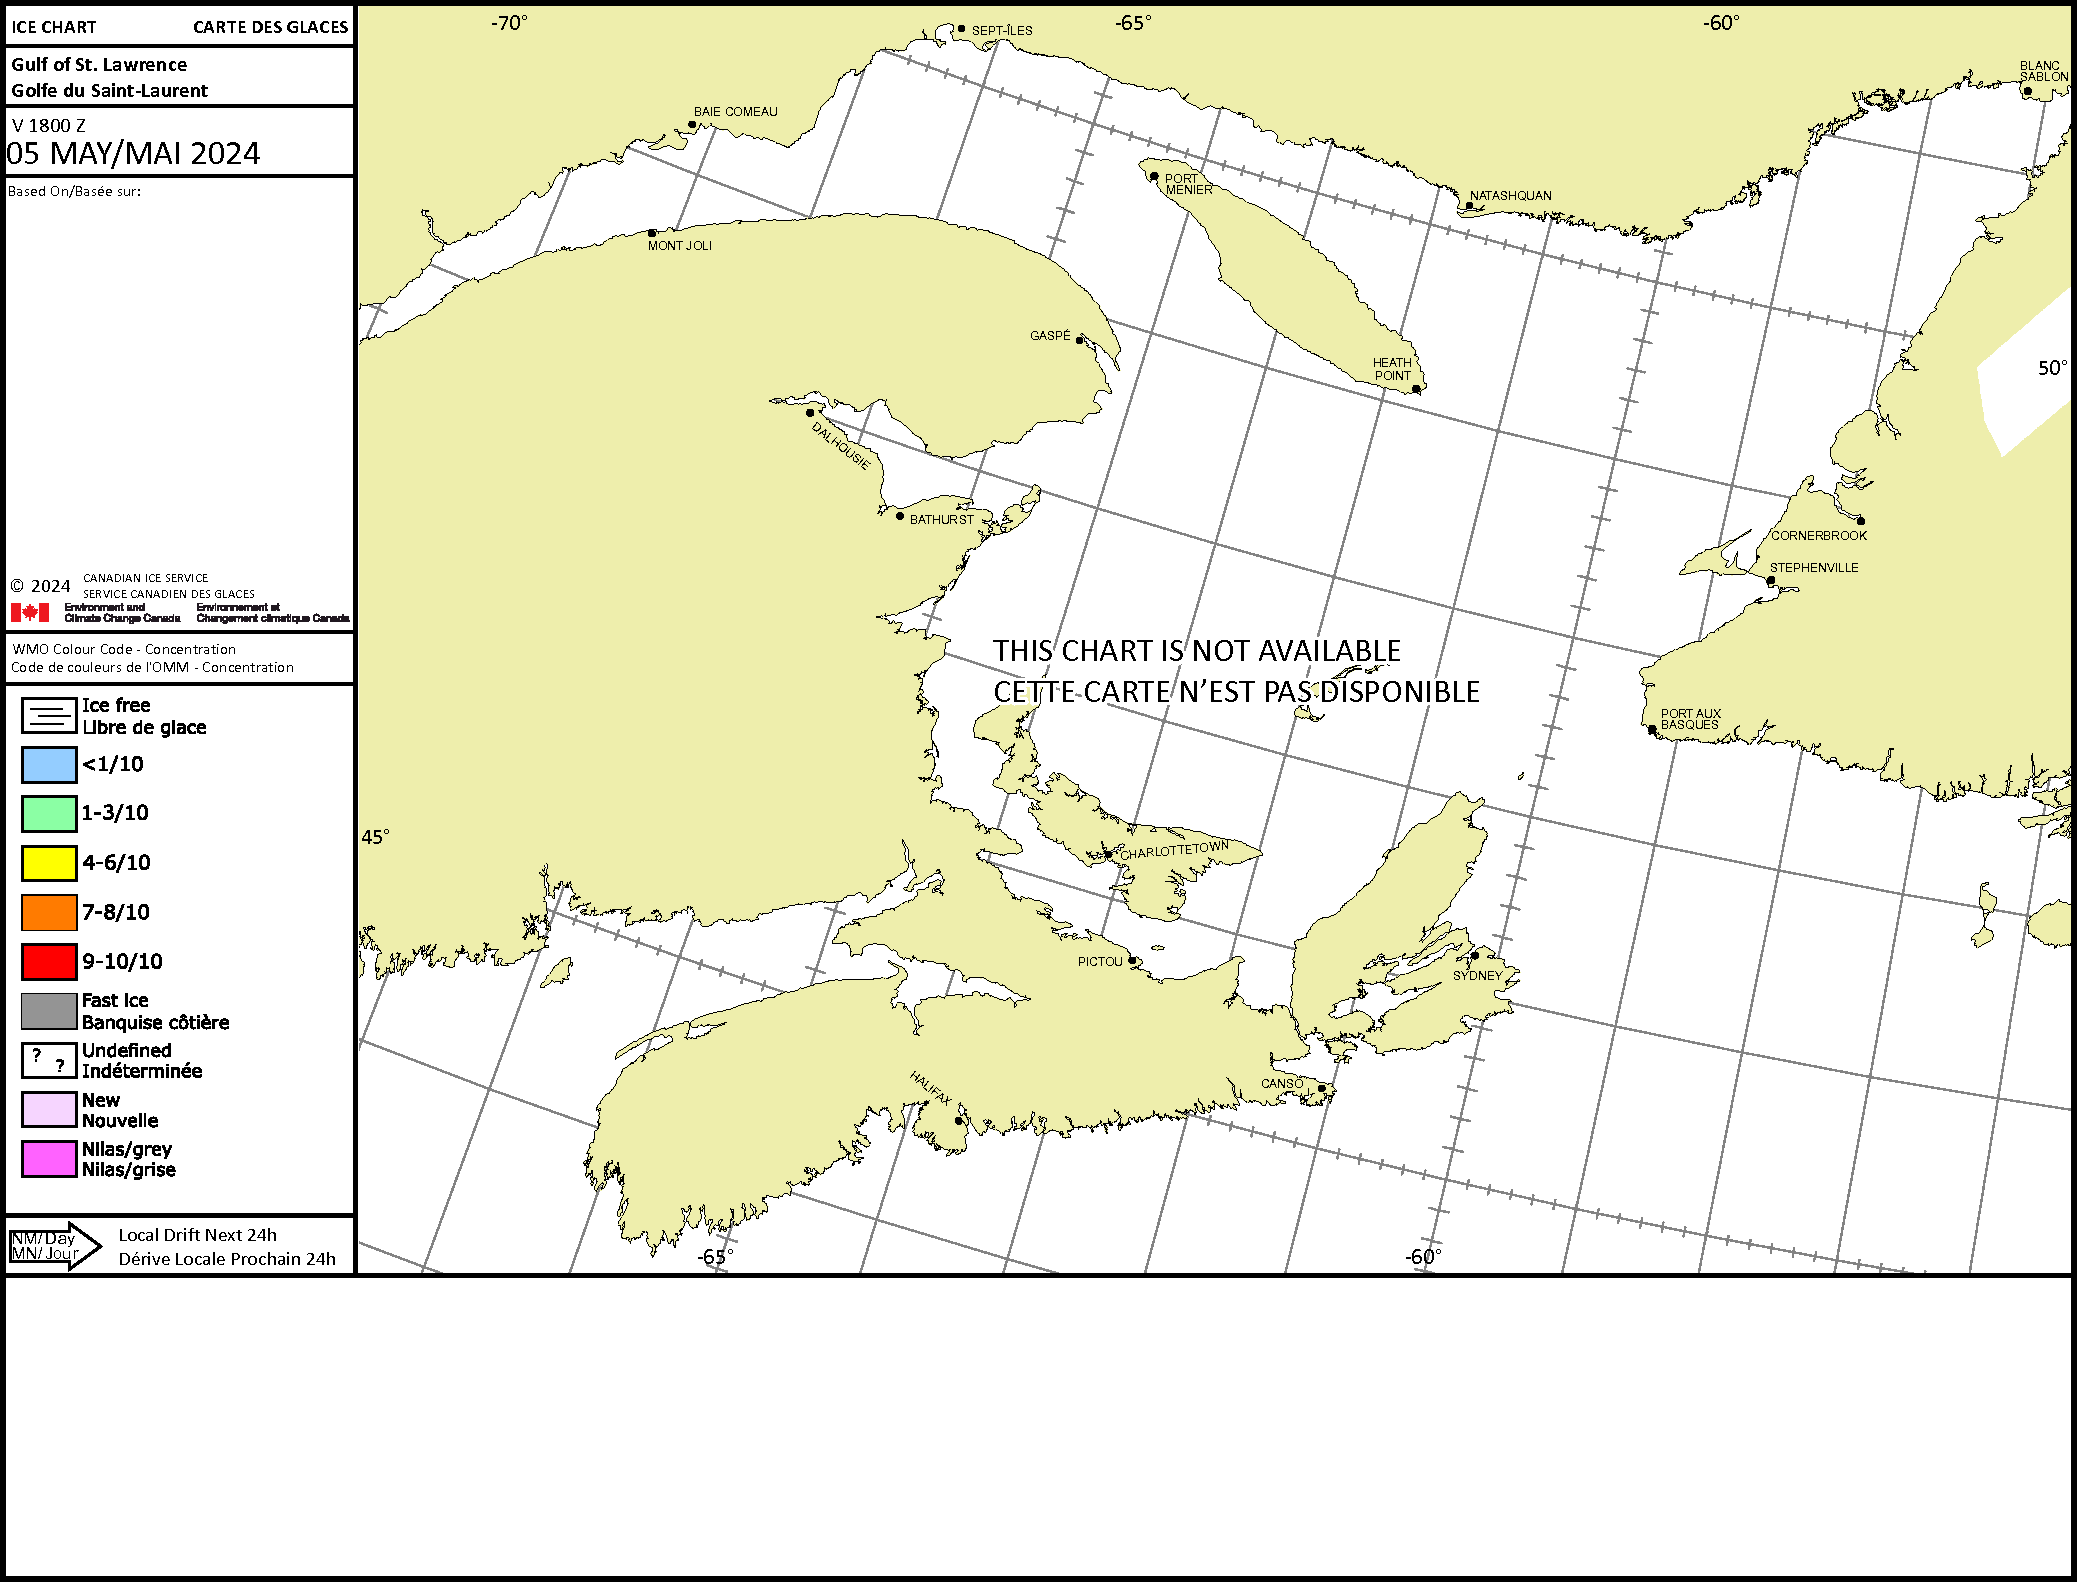 Daily ice chart: Concentration for the Gulf of St. Lawrence (Canada)